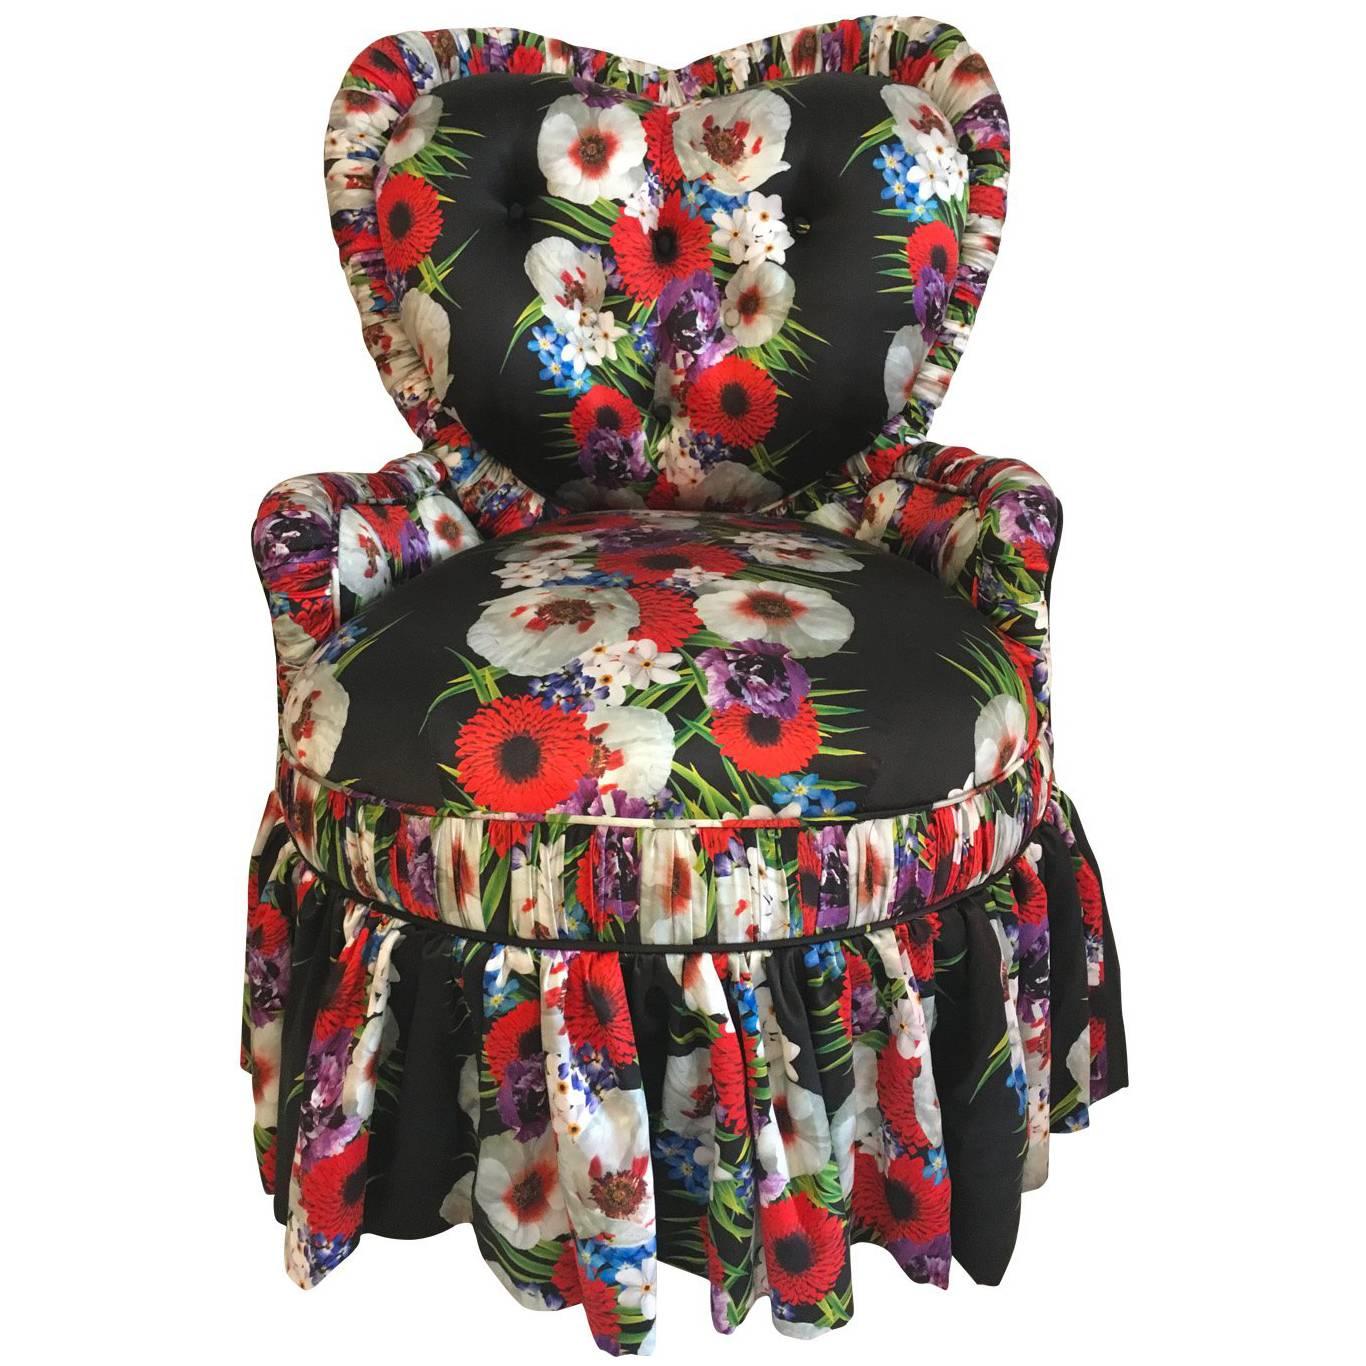  Victorian Style Heart Chair Upholstered in Silk Dolce & Gabbana Fabric For Sale